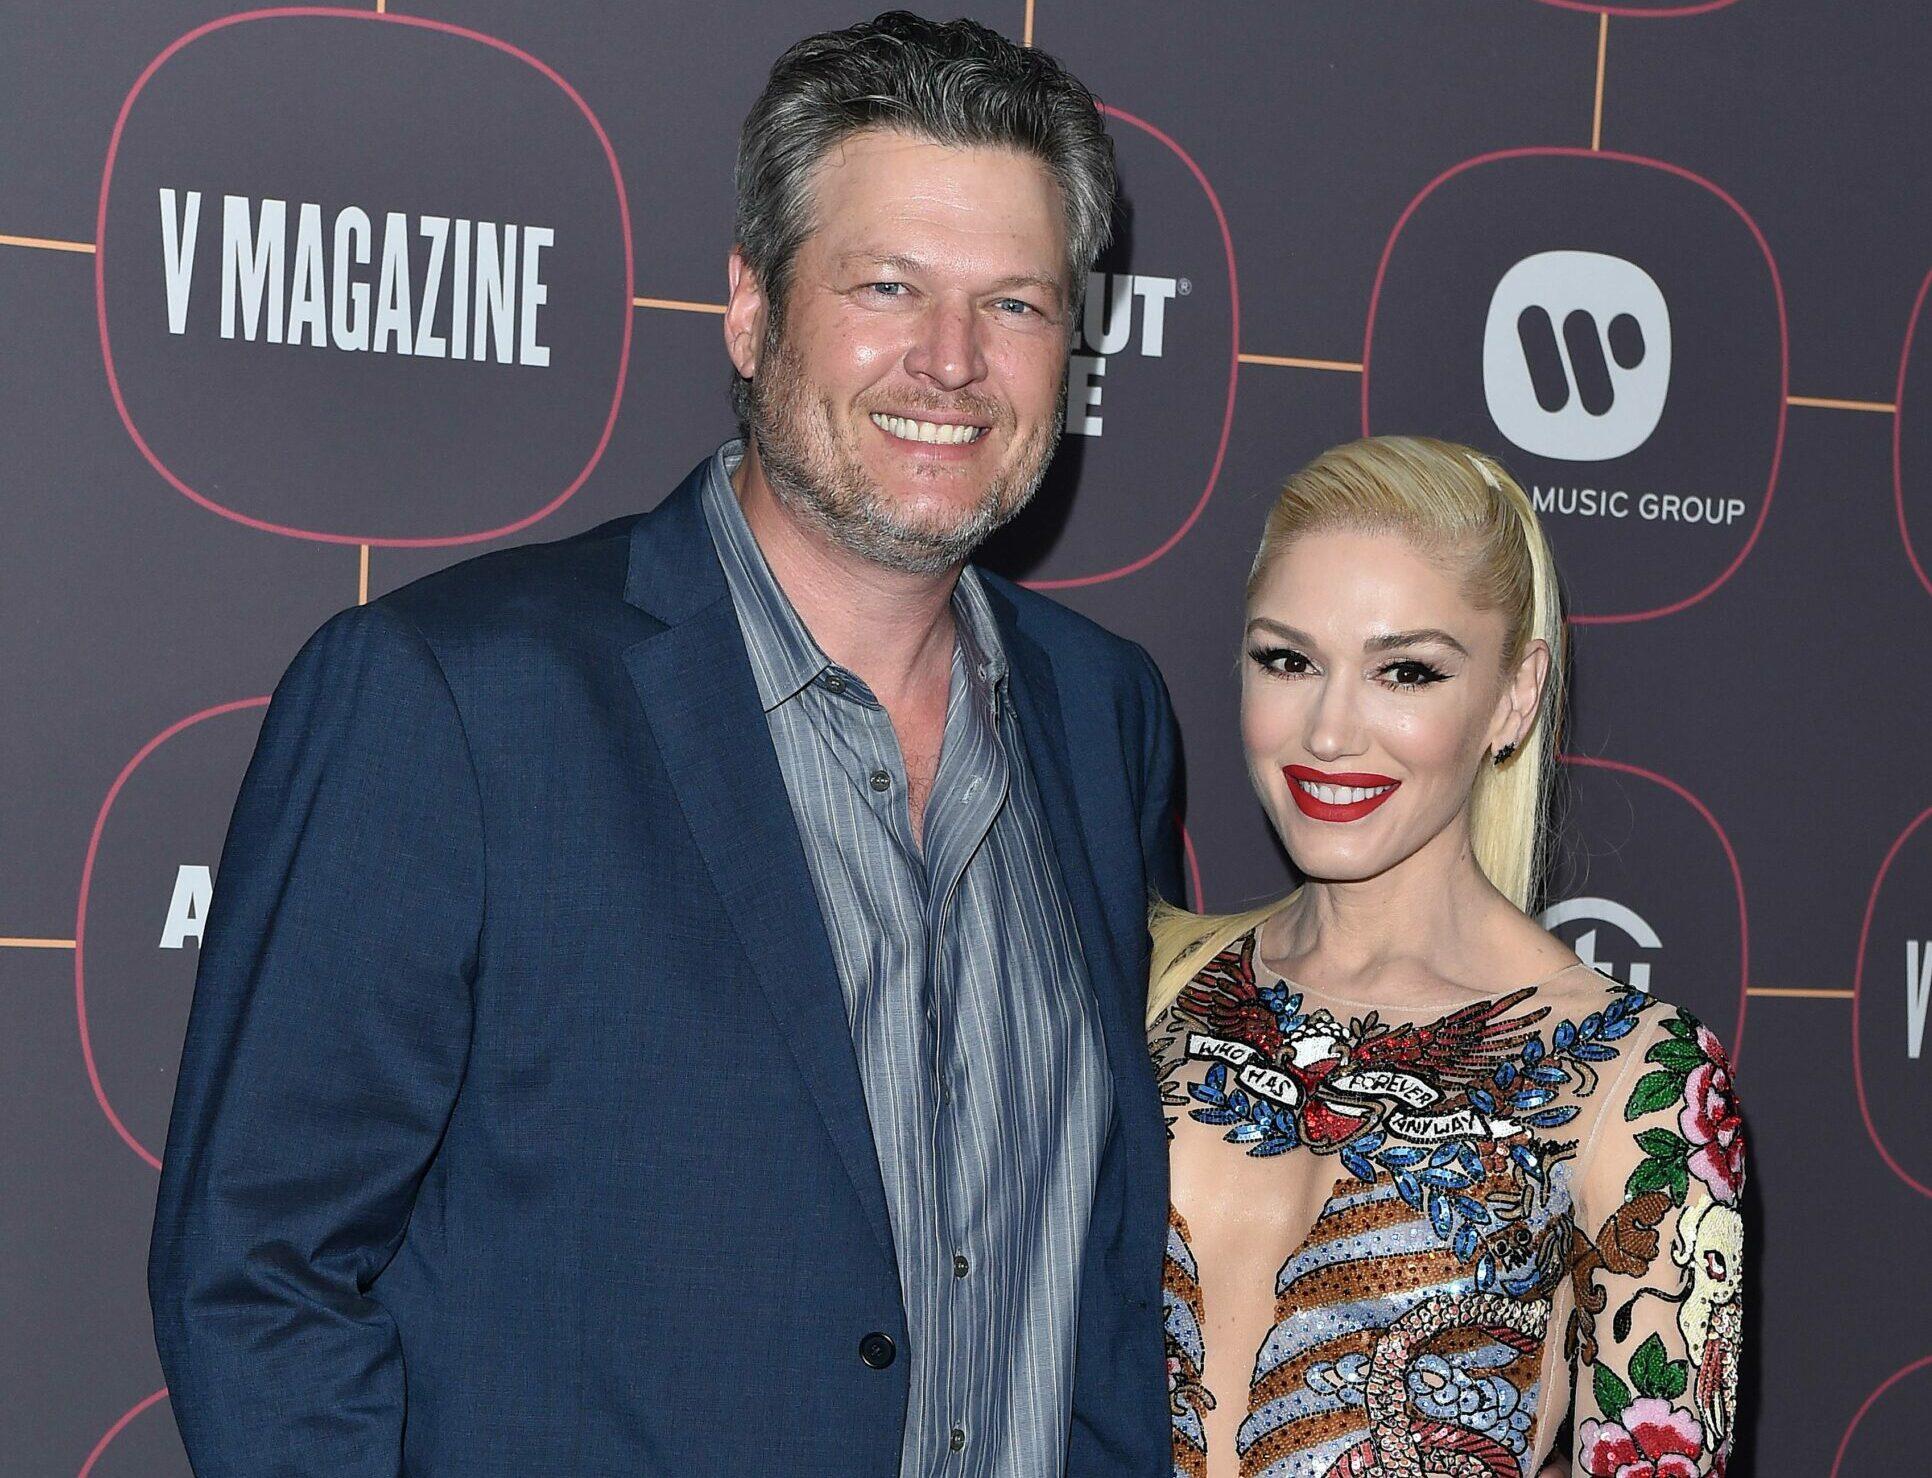 Warner Music Group Pre-Grammy Party 2020. Hollywood Athletic Club, Hollywood, California. Pictured: TeaMarr. EVENT January 23, 2020. 23 Jan 2020 Pictured: Blake Shelton,Gwen Stefani.